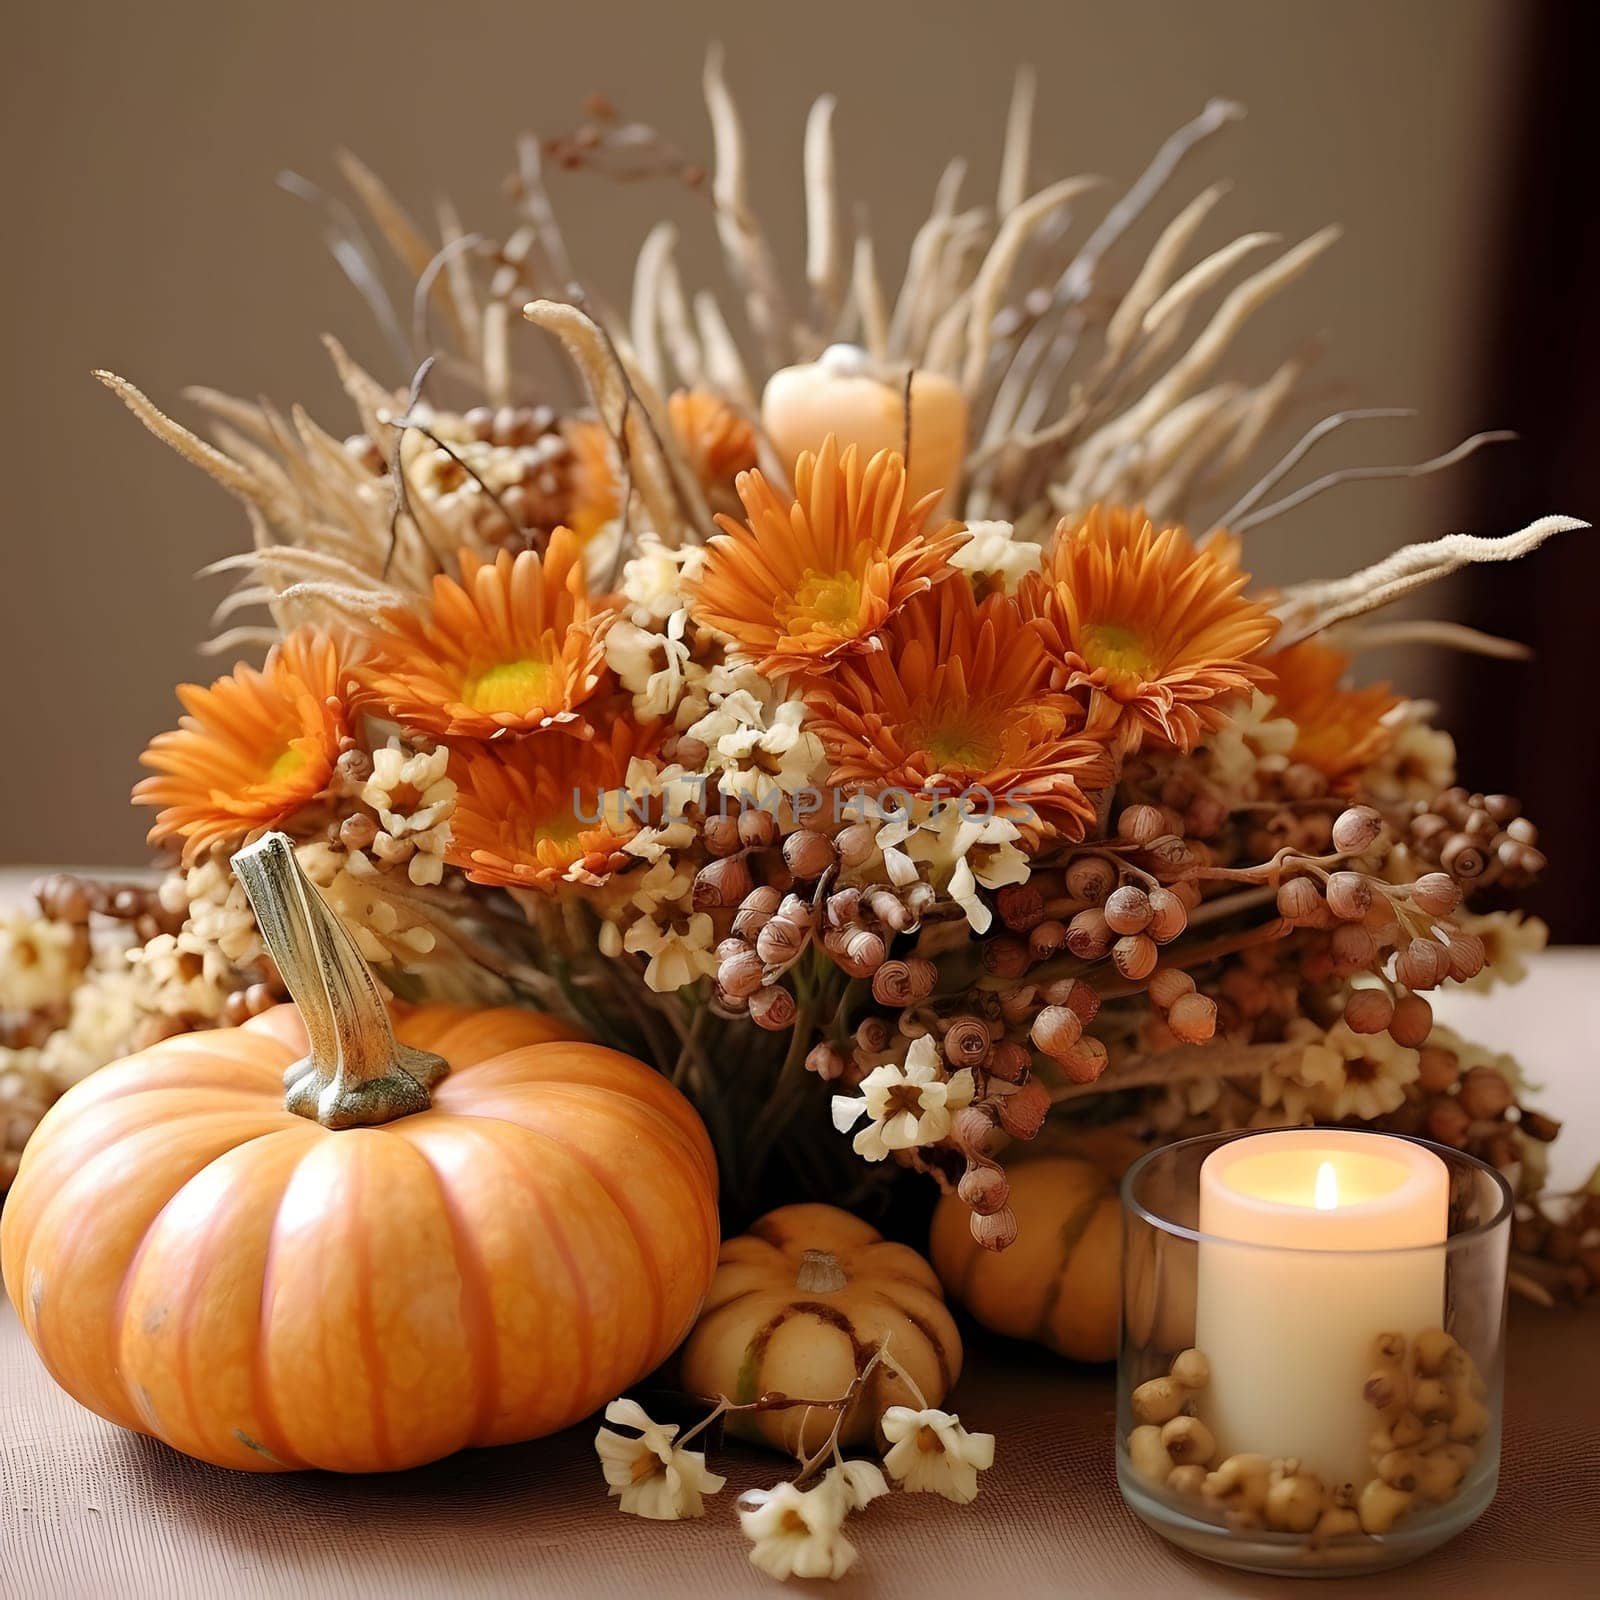 Elegantly arranged white candle pumpkins and autumn flowers. Pumpkin as a dish of thanksgiving for the harvest. by ThemesS